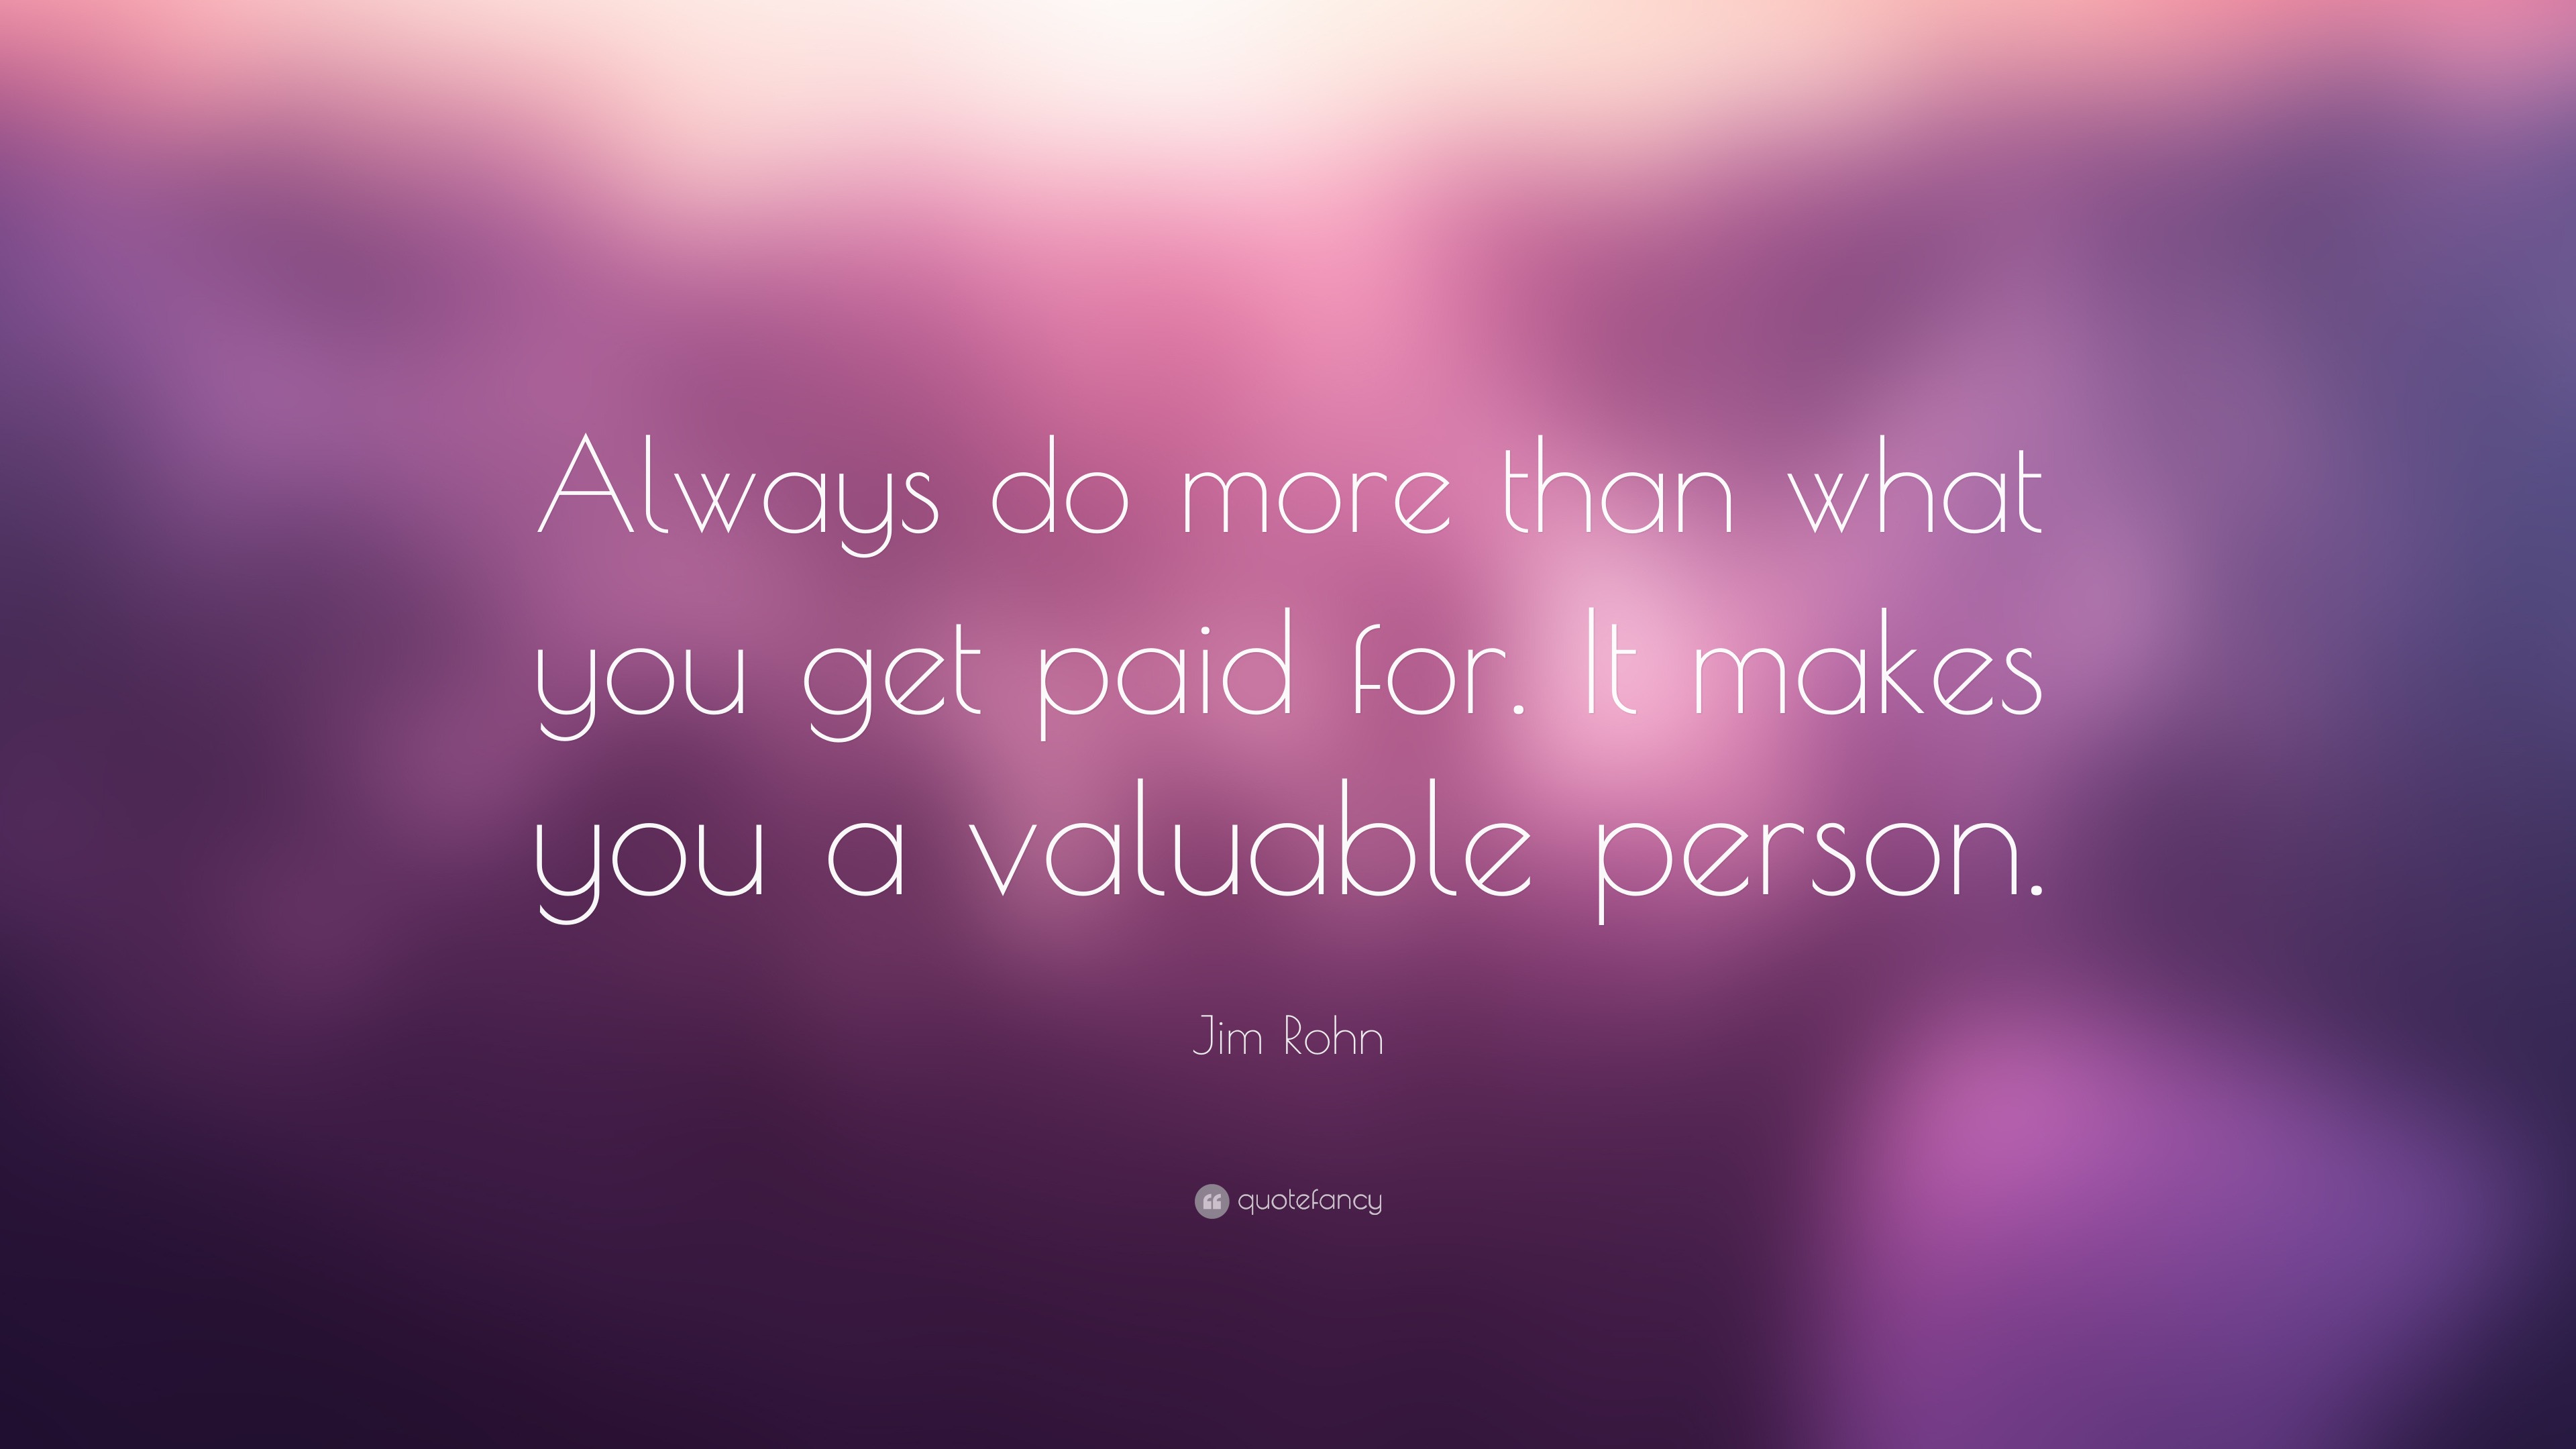 Jim Rohn Quote: “Always do more than what you get paid for. It makes ...